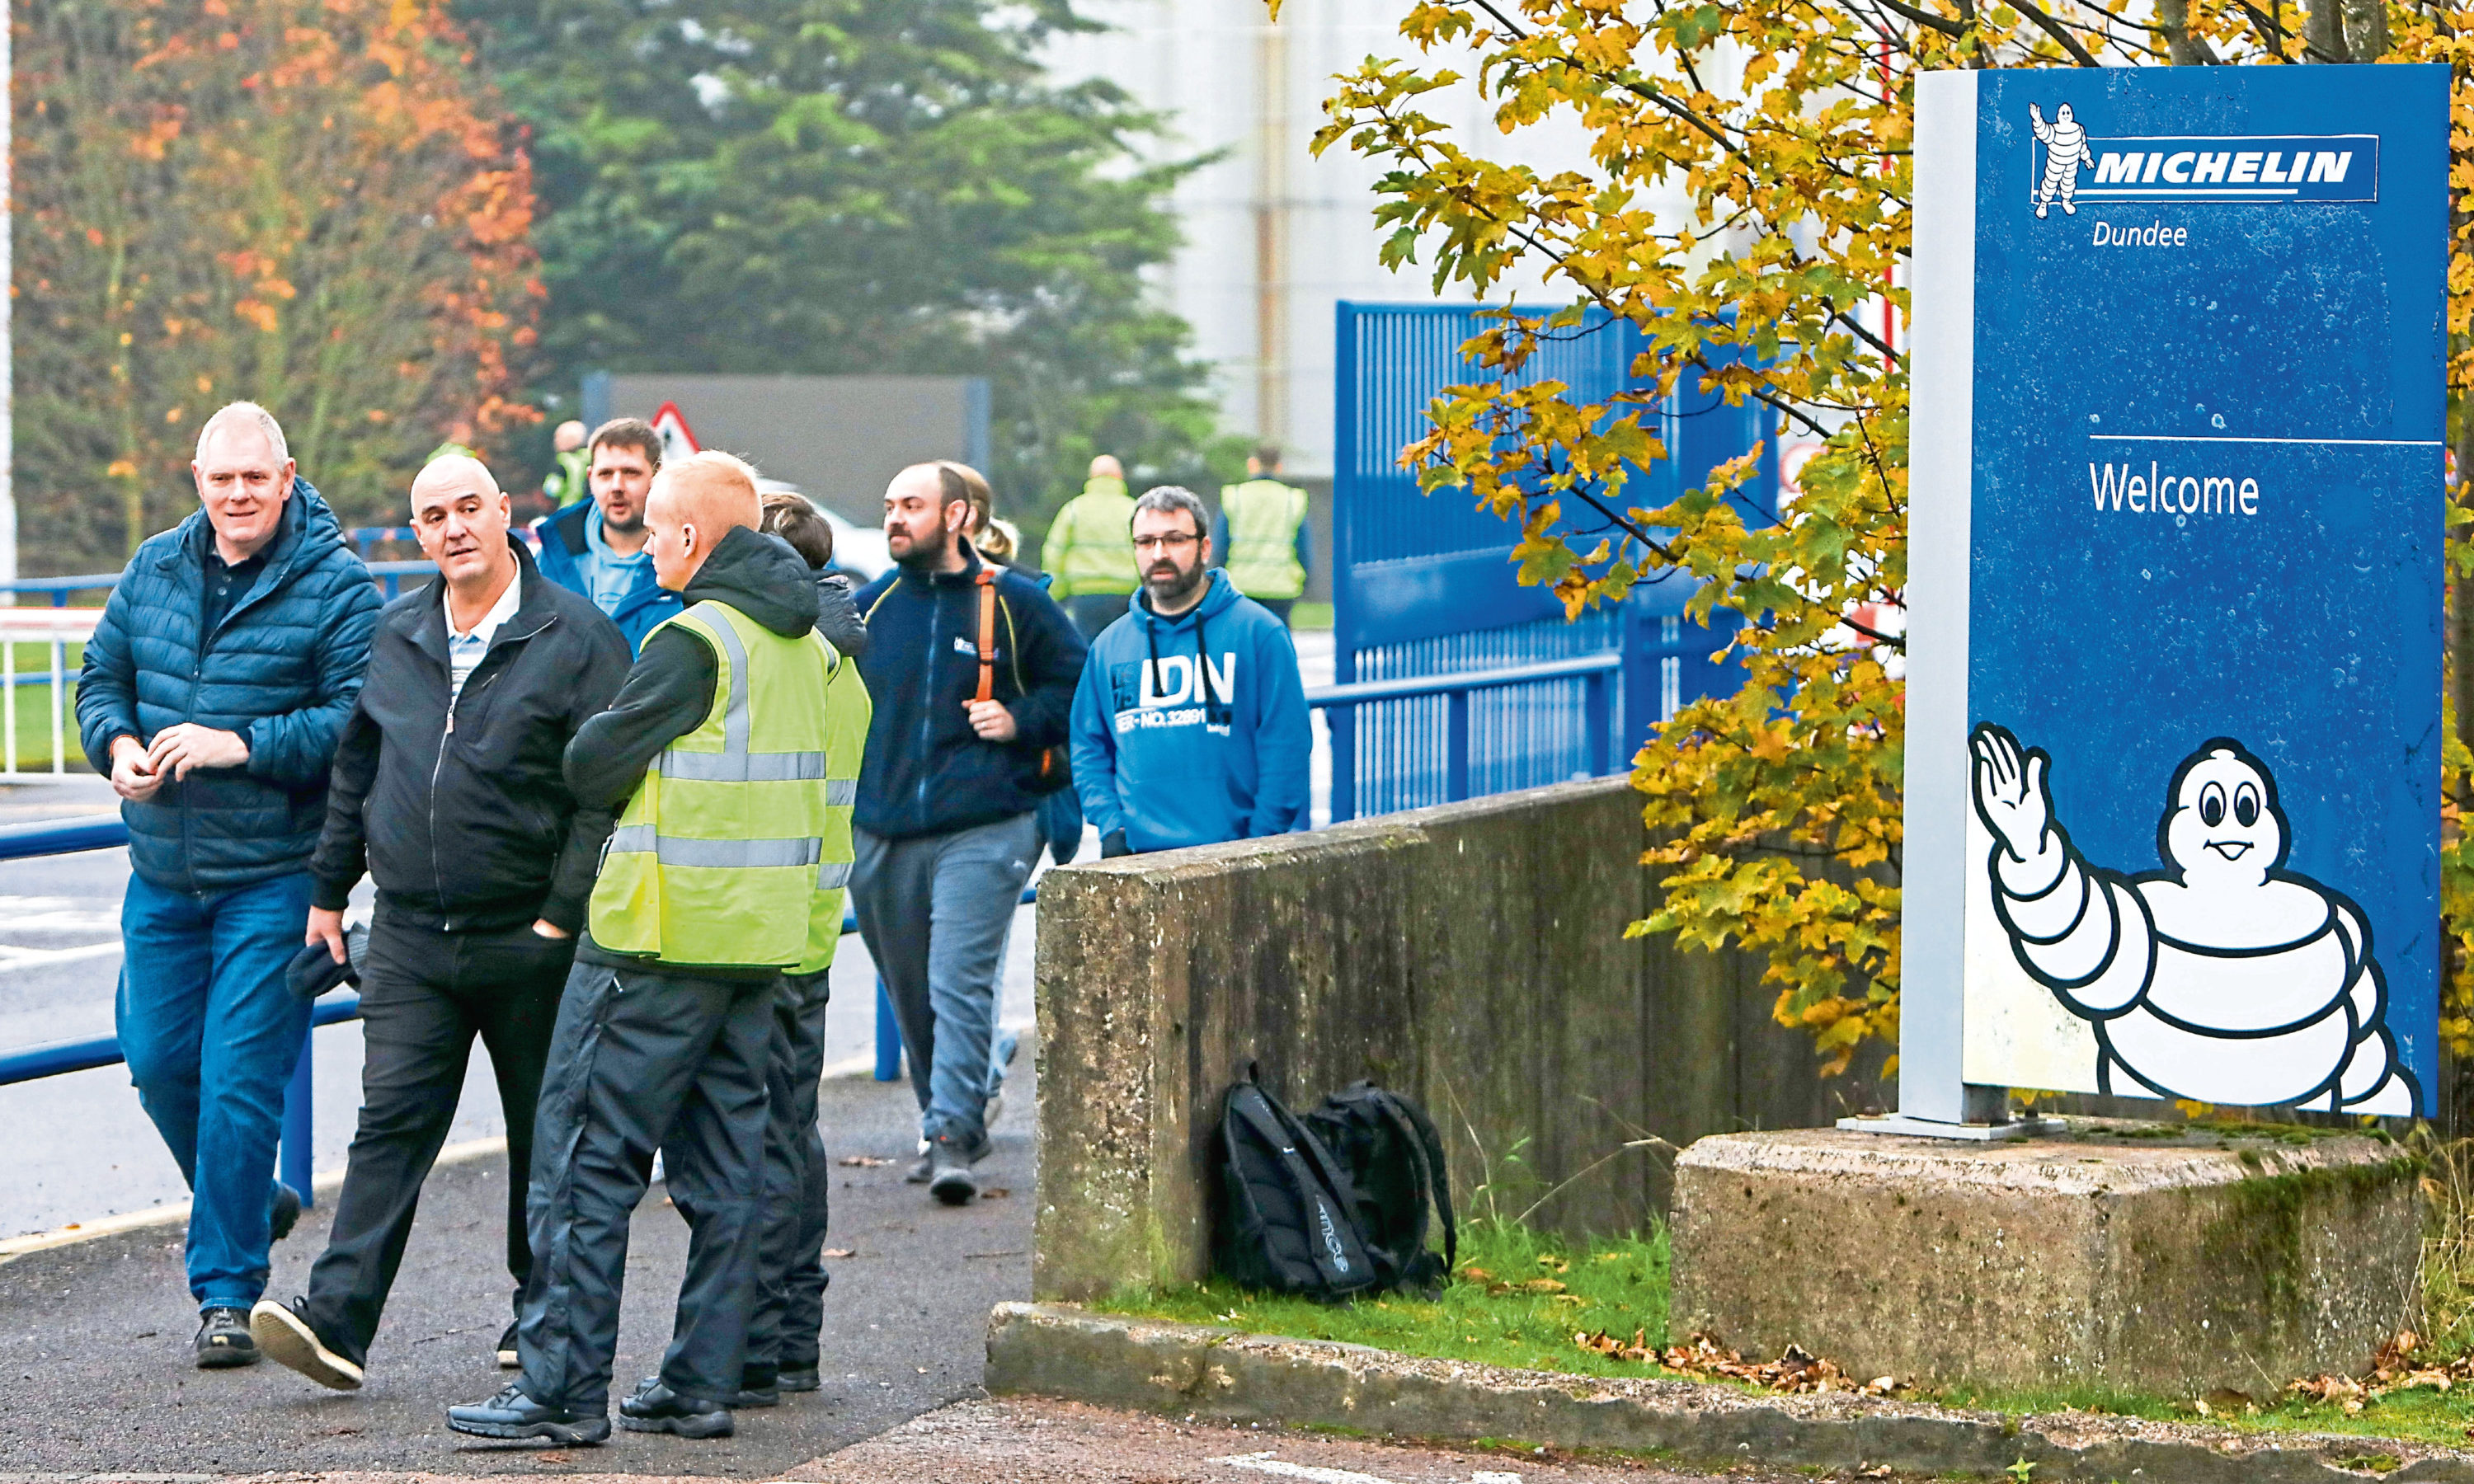 Staff leave Michelin Factory in Dundee after the closure announcement.